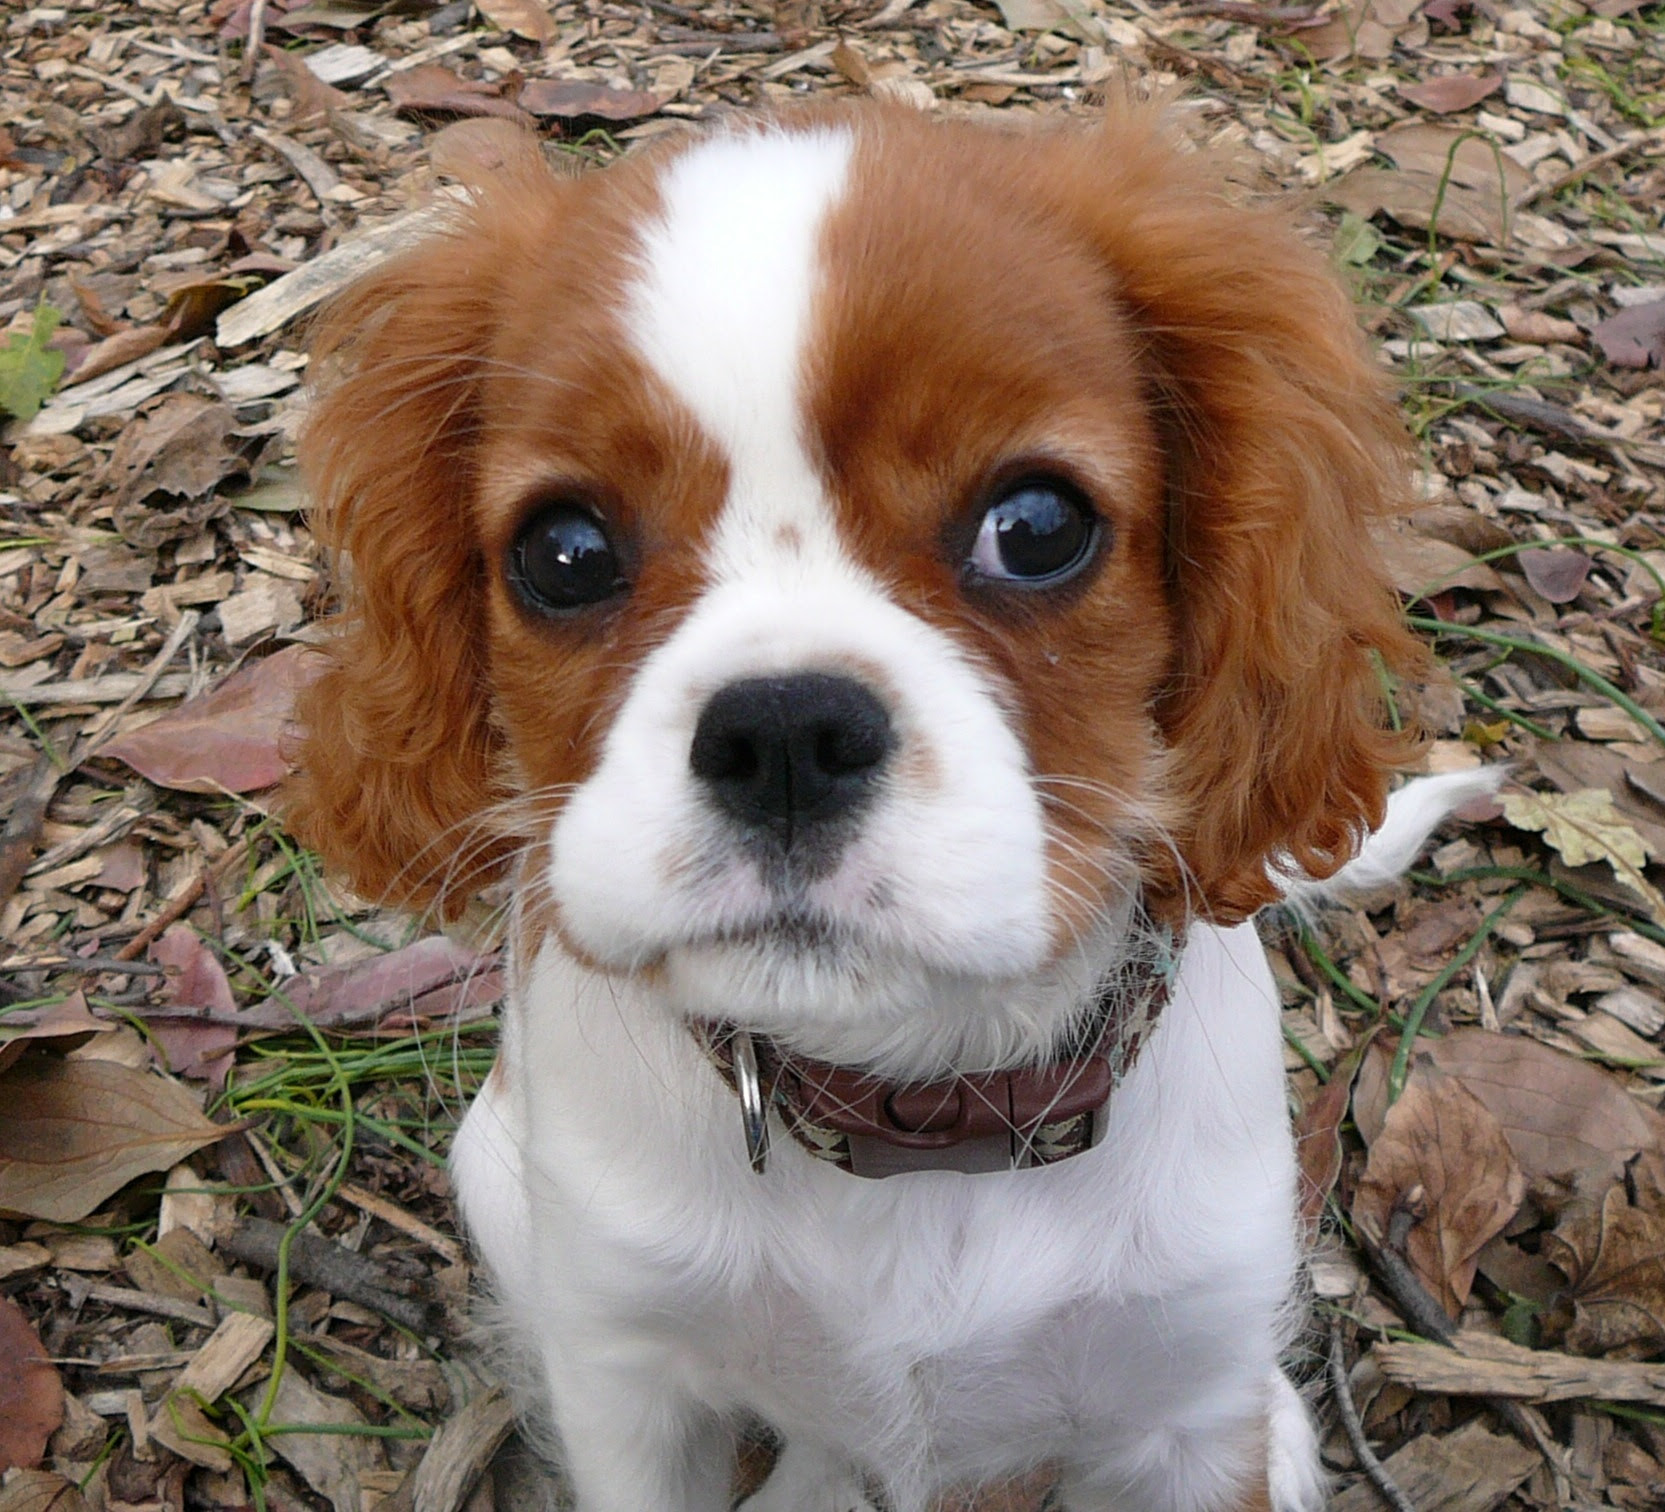 DOGS DAY BREED Cavalier King Charles Spaniel DOGS DAY